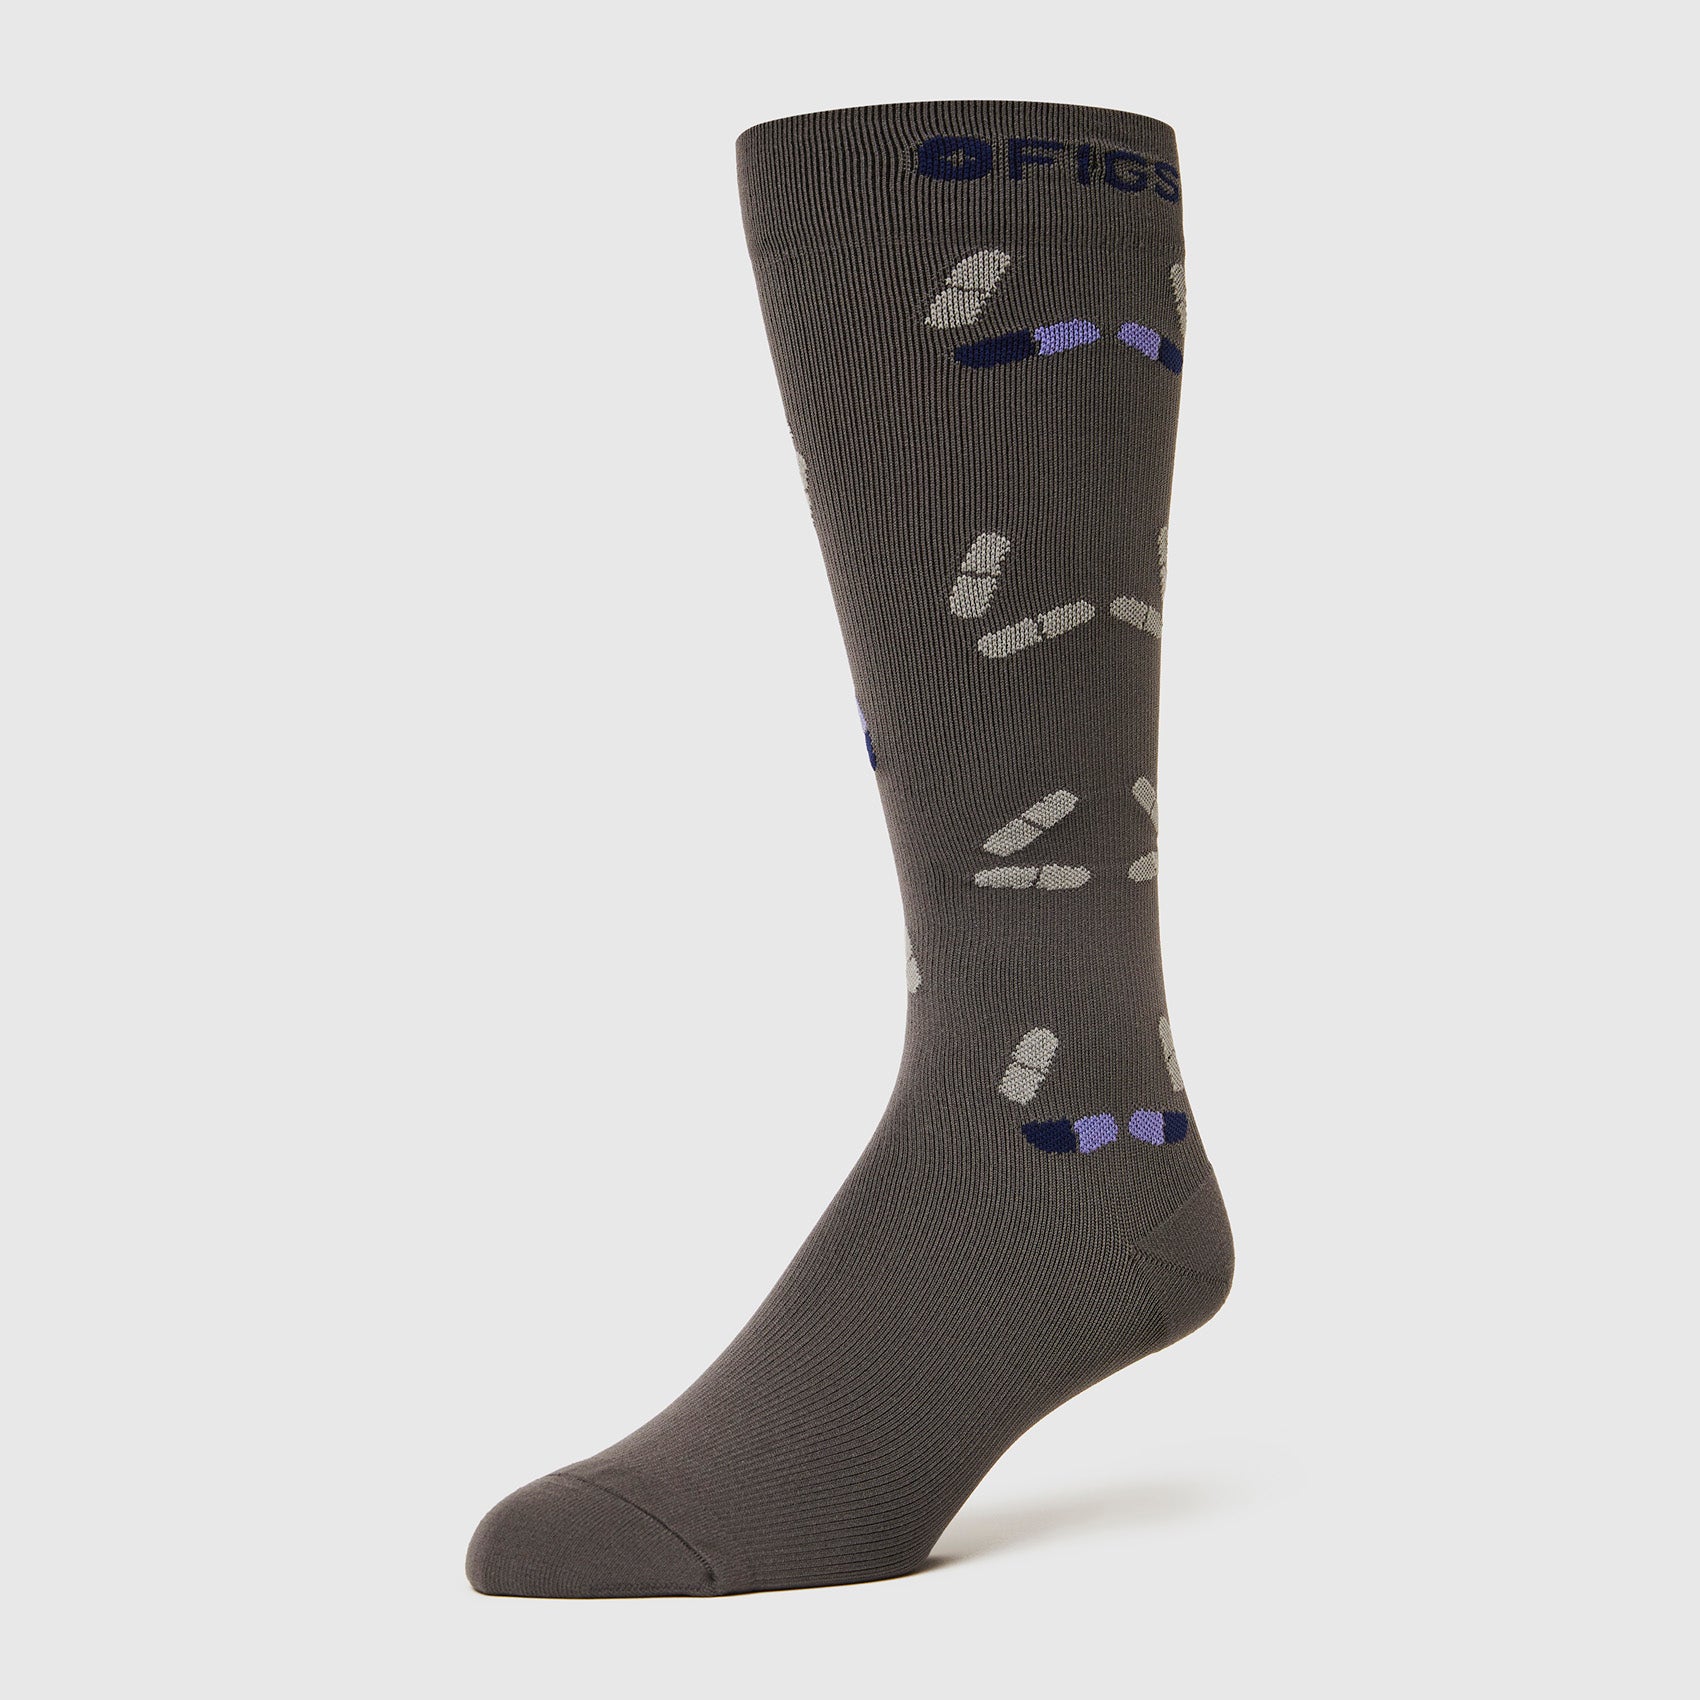 Women's Repeat Cross Compression Socks - Cross/Extreme Blue · FIGS